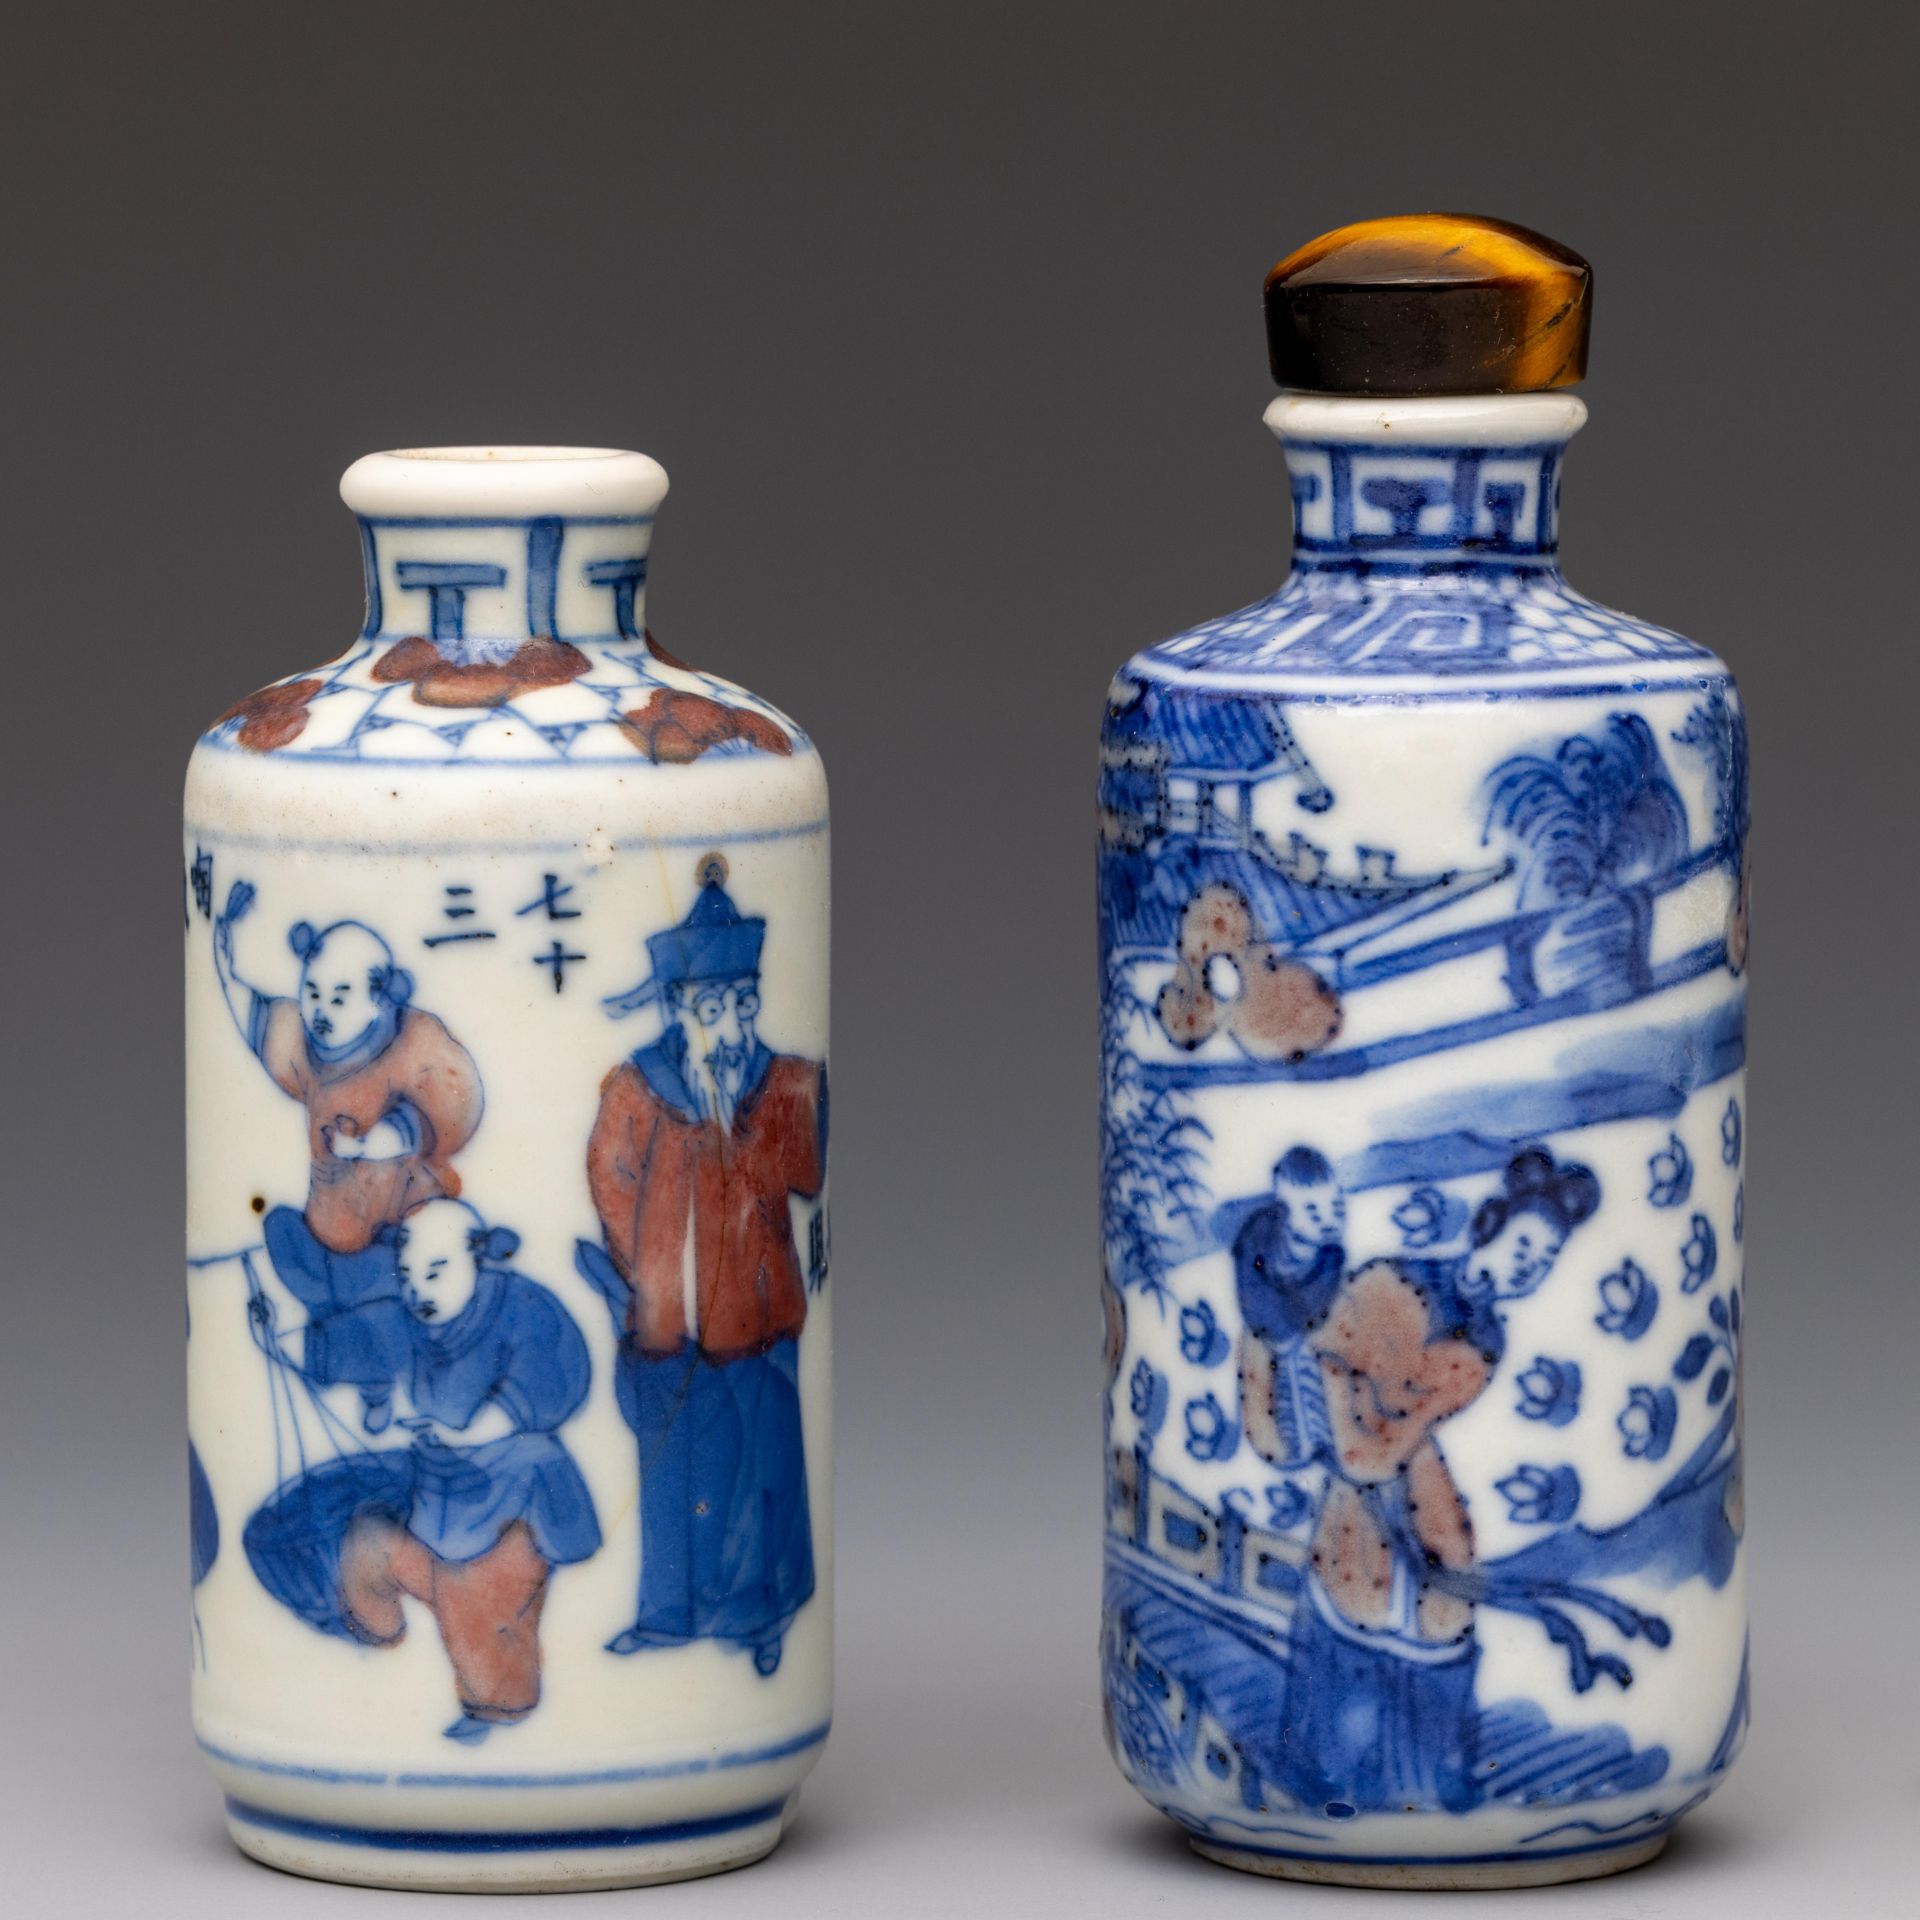 China, two blue and white and iron-red porcelain figural snuff bottles and one stopper, 19th century